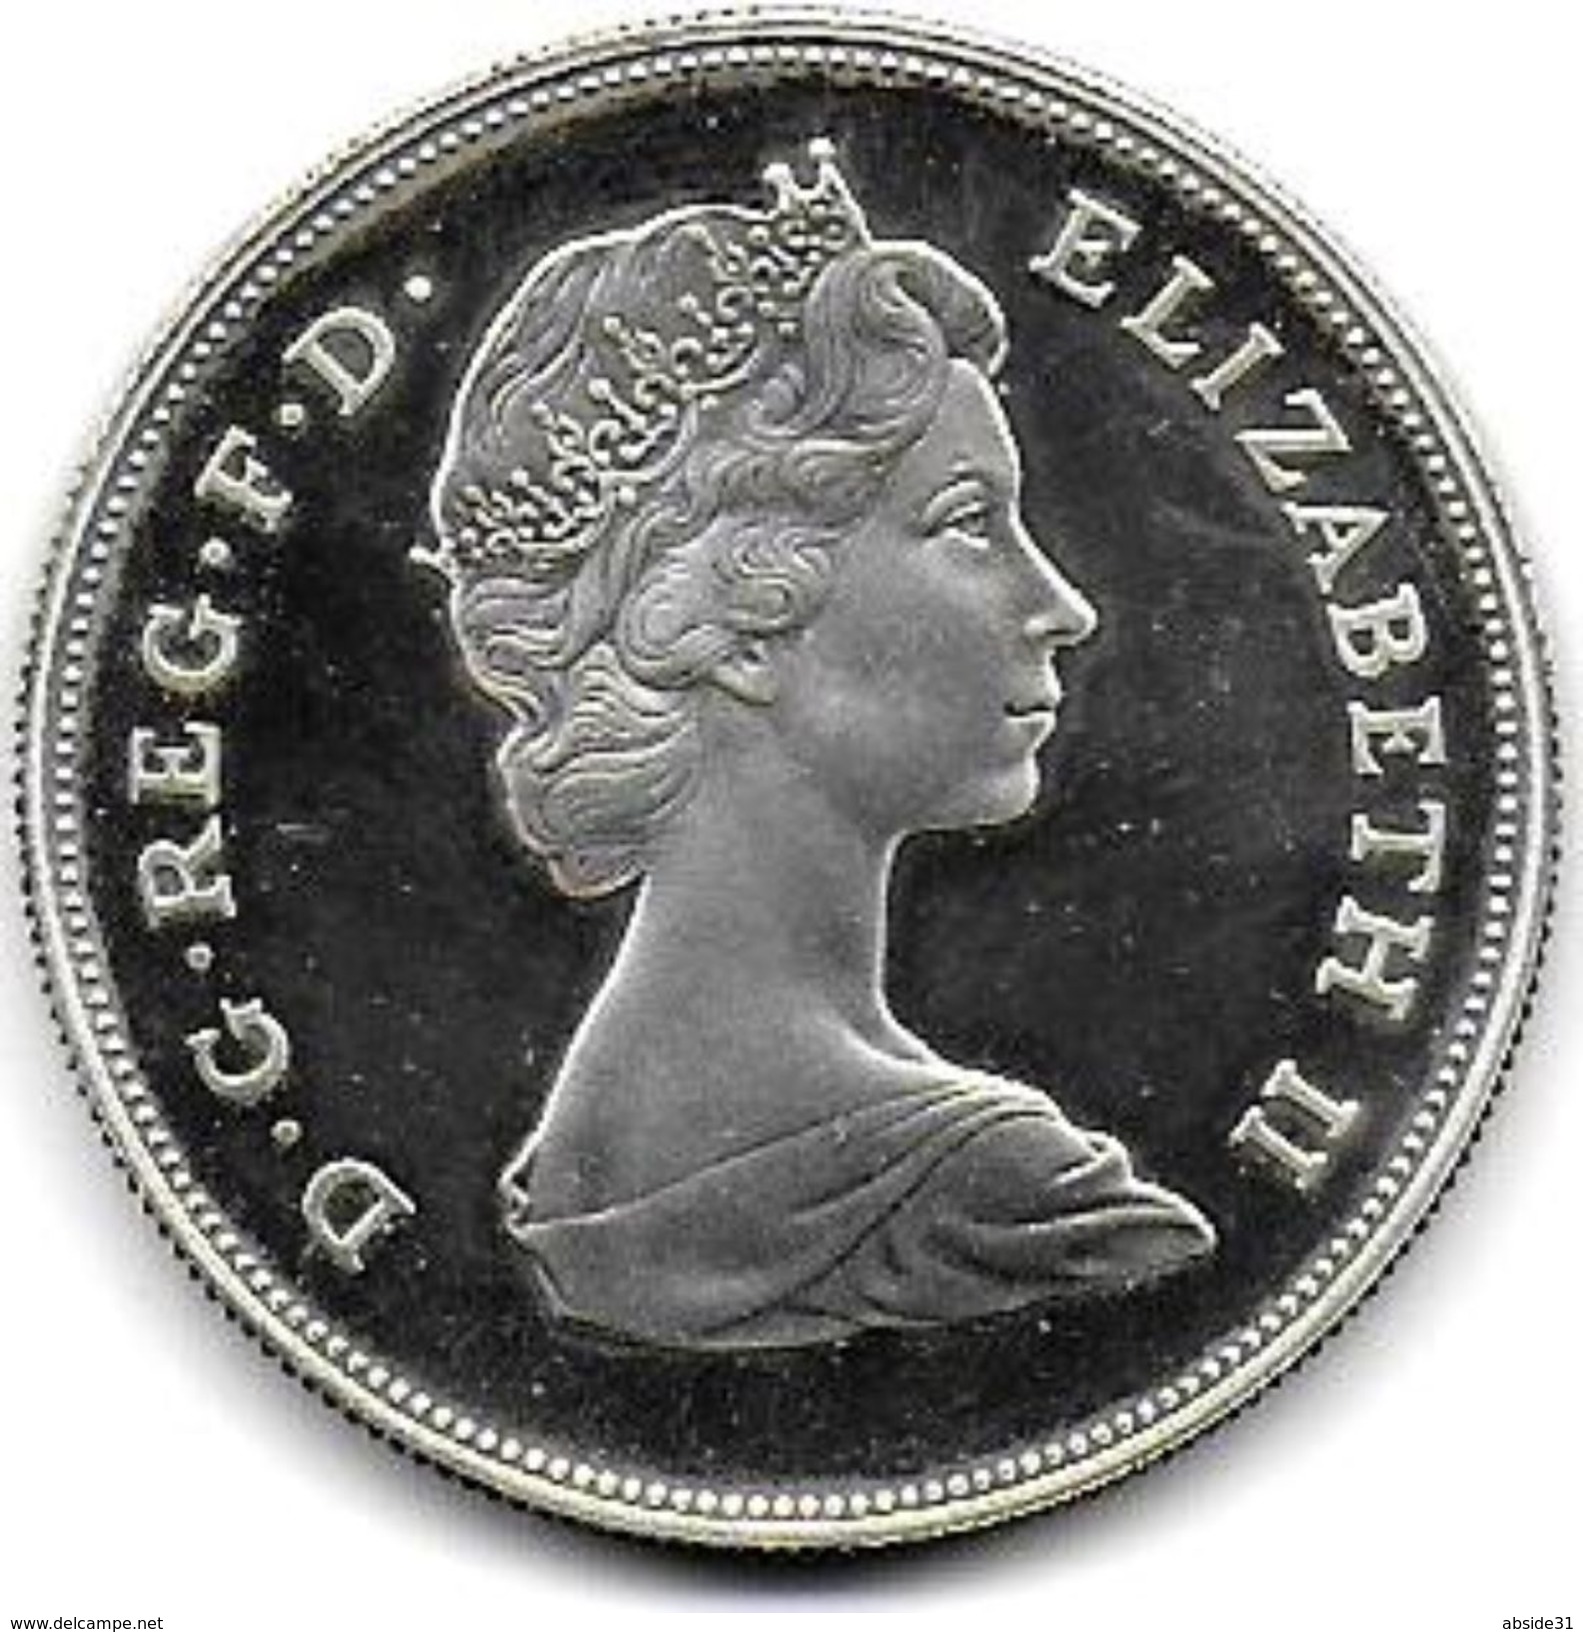 H.R.H. The Prince Of Wales And Lady Diana Spencer ( Proof Silver ) - Maundy Sets & Gedenkmünzen